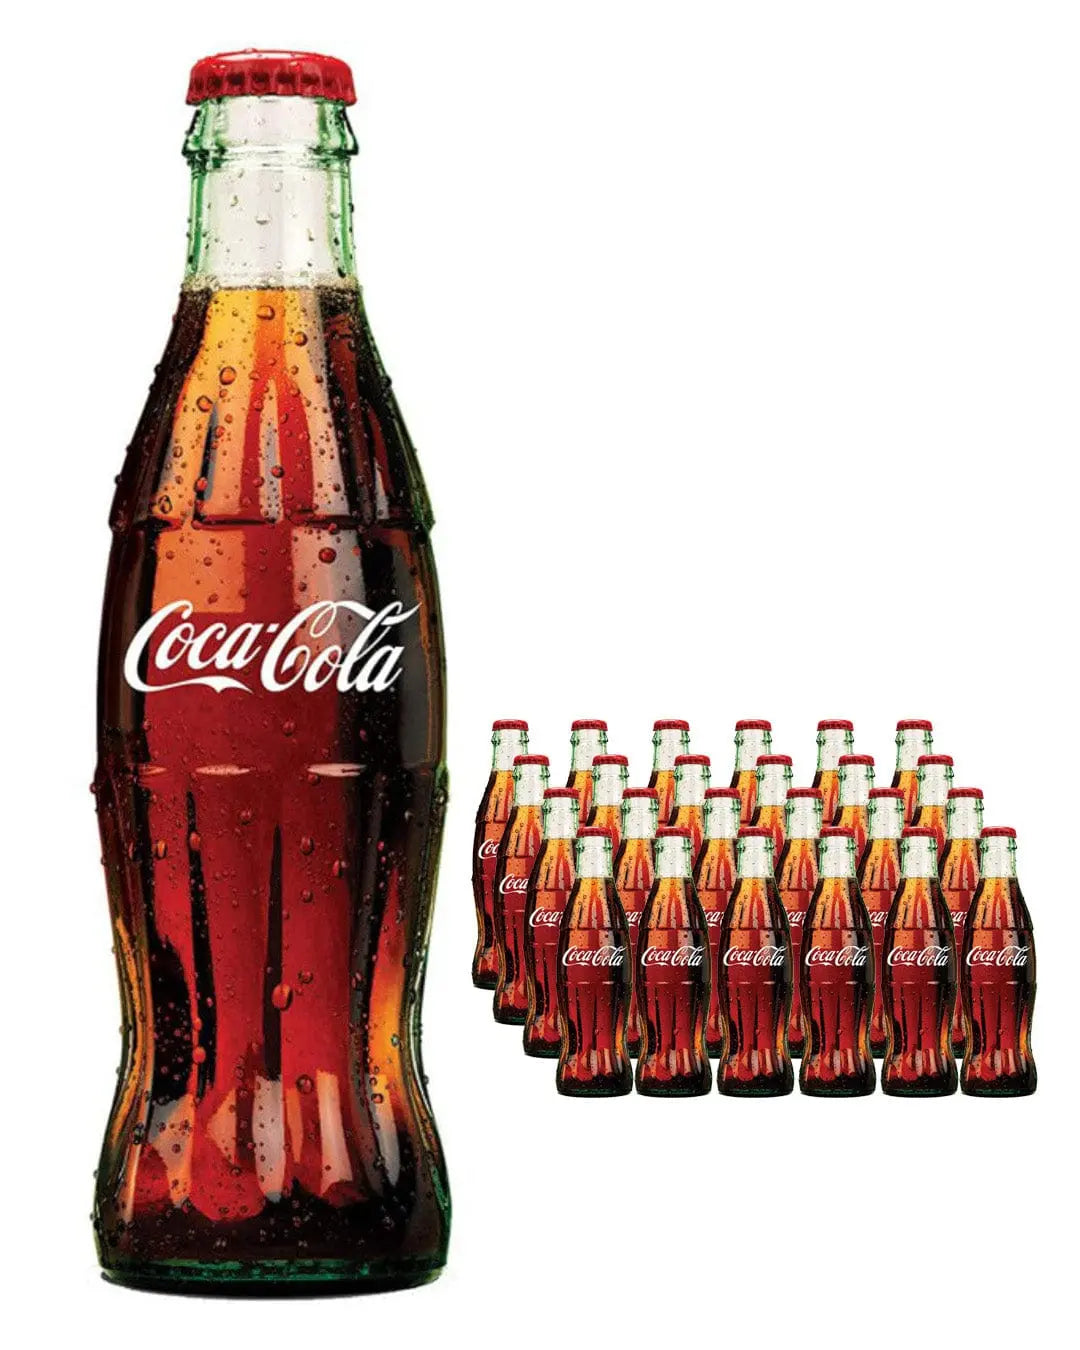 Coca-Cola Glass Bottles Multipack, 24 x 330 ml Soft Drinks & Mixers 5017726133887